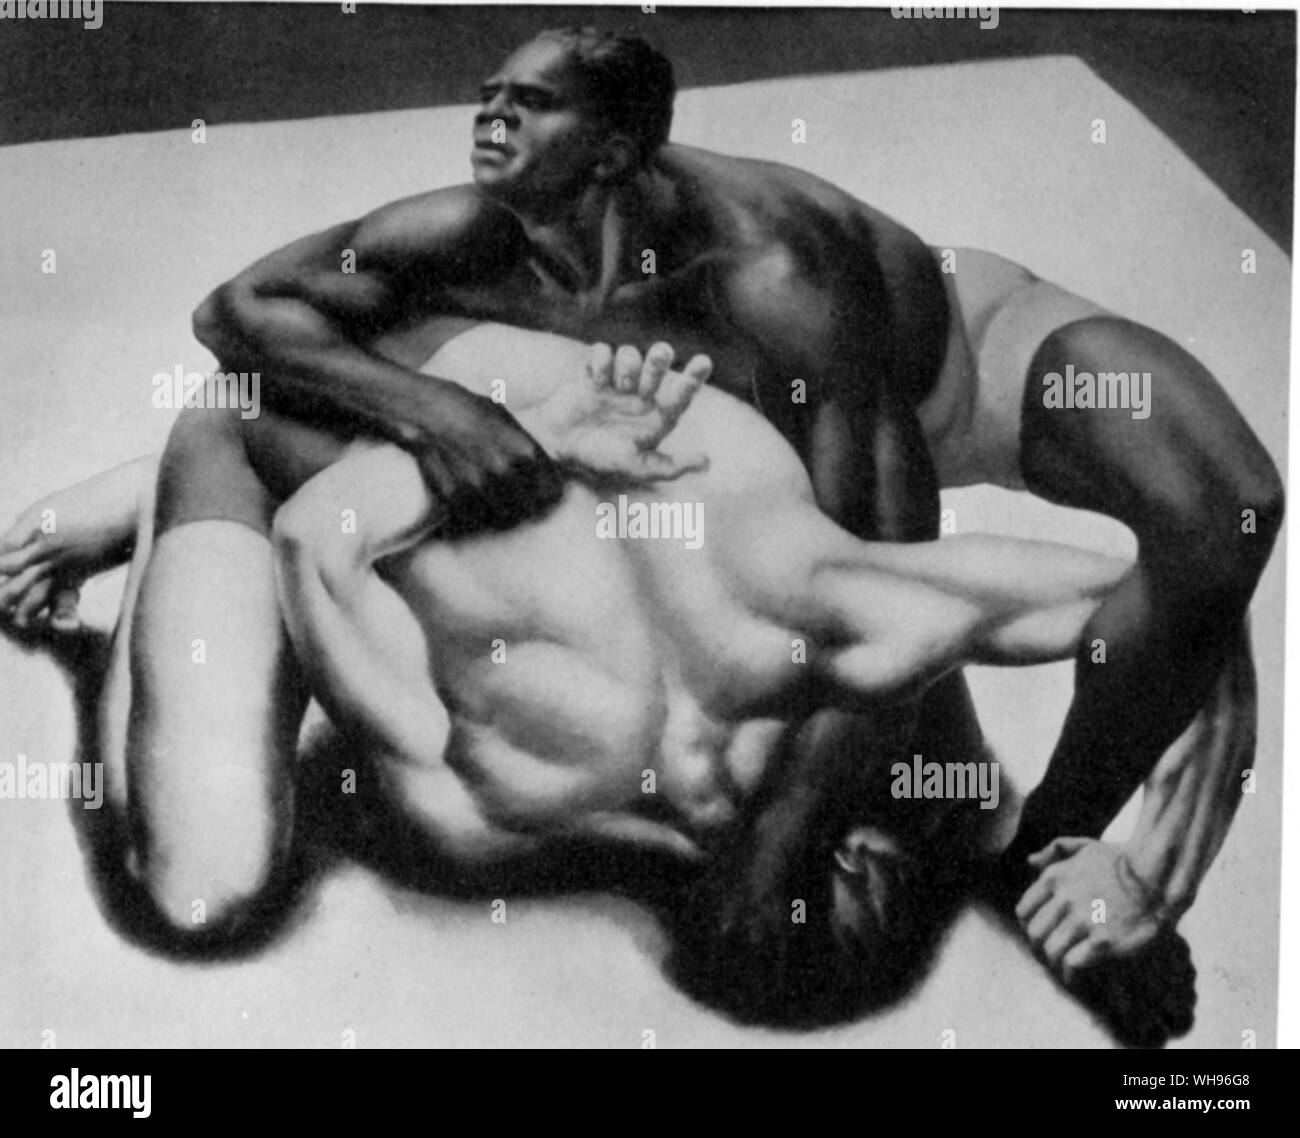 Painting called Struggle by Ruth Miller (United States) which won second prize in the Olympic art contest Olympic Games Los Angeles 1932 Stock Photo